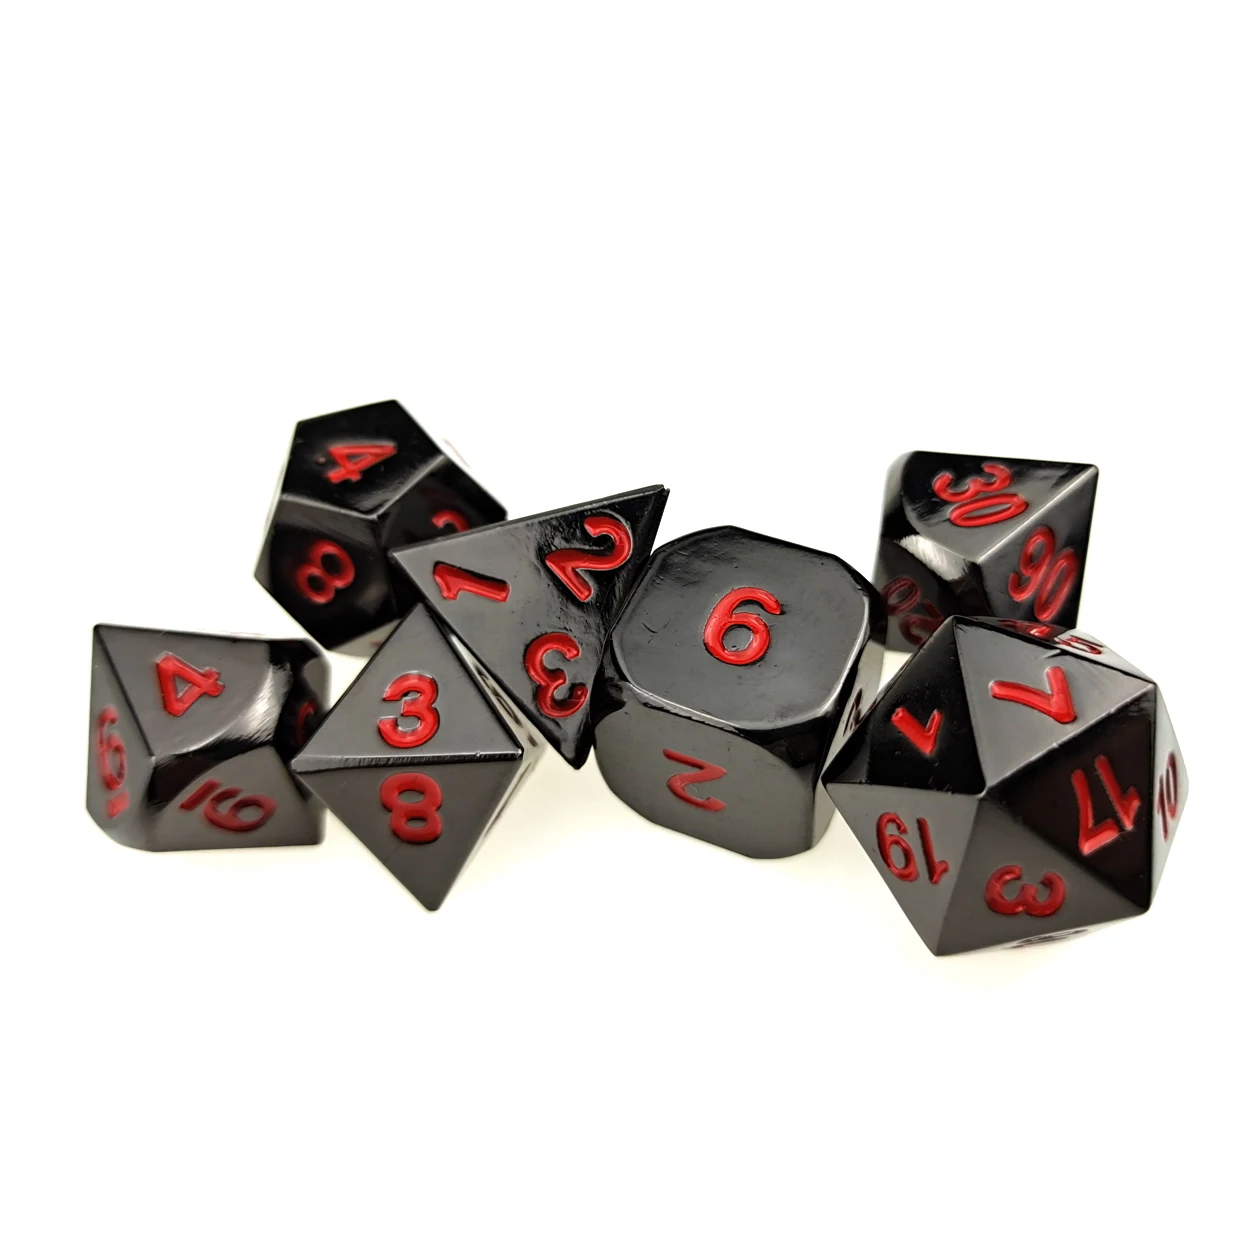 UONUOT 7pcs DND Metal Dice Set with Black Pouches D&D Polyhedral Dice for Dungeons and Dragons Role Playing Dice Games RPGs 